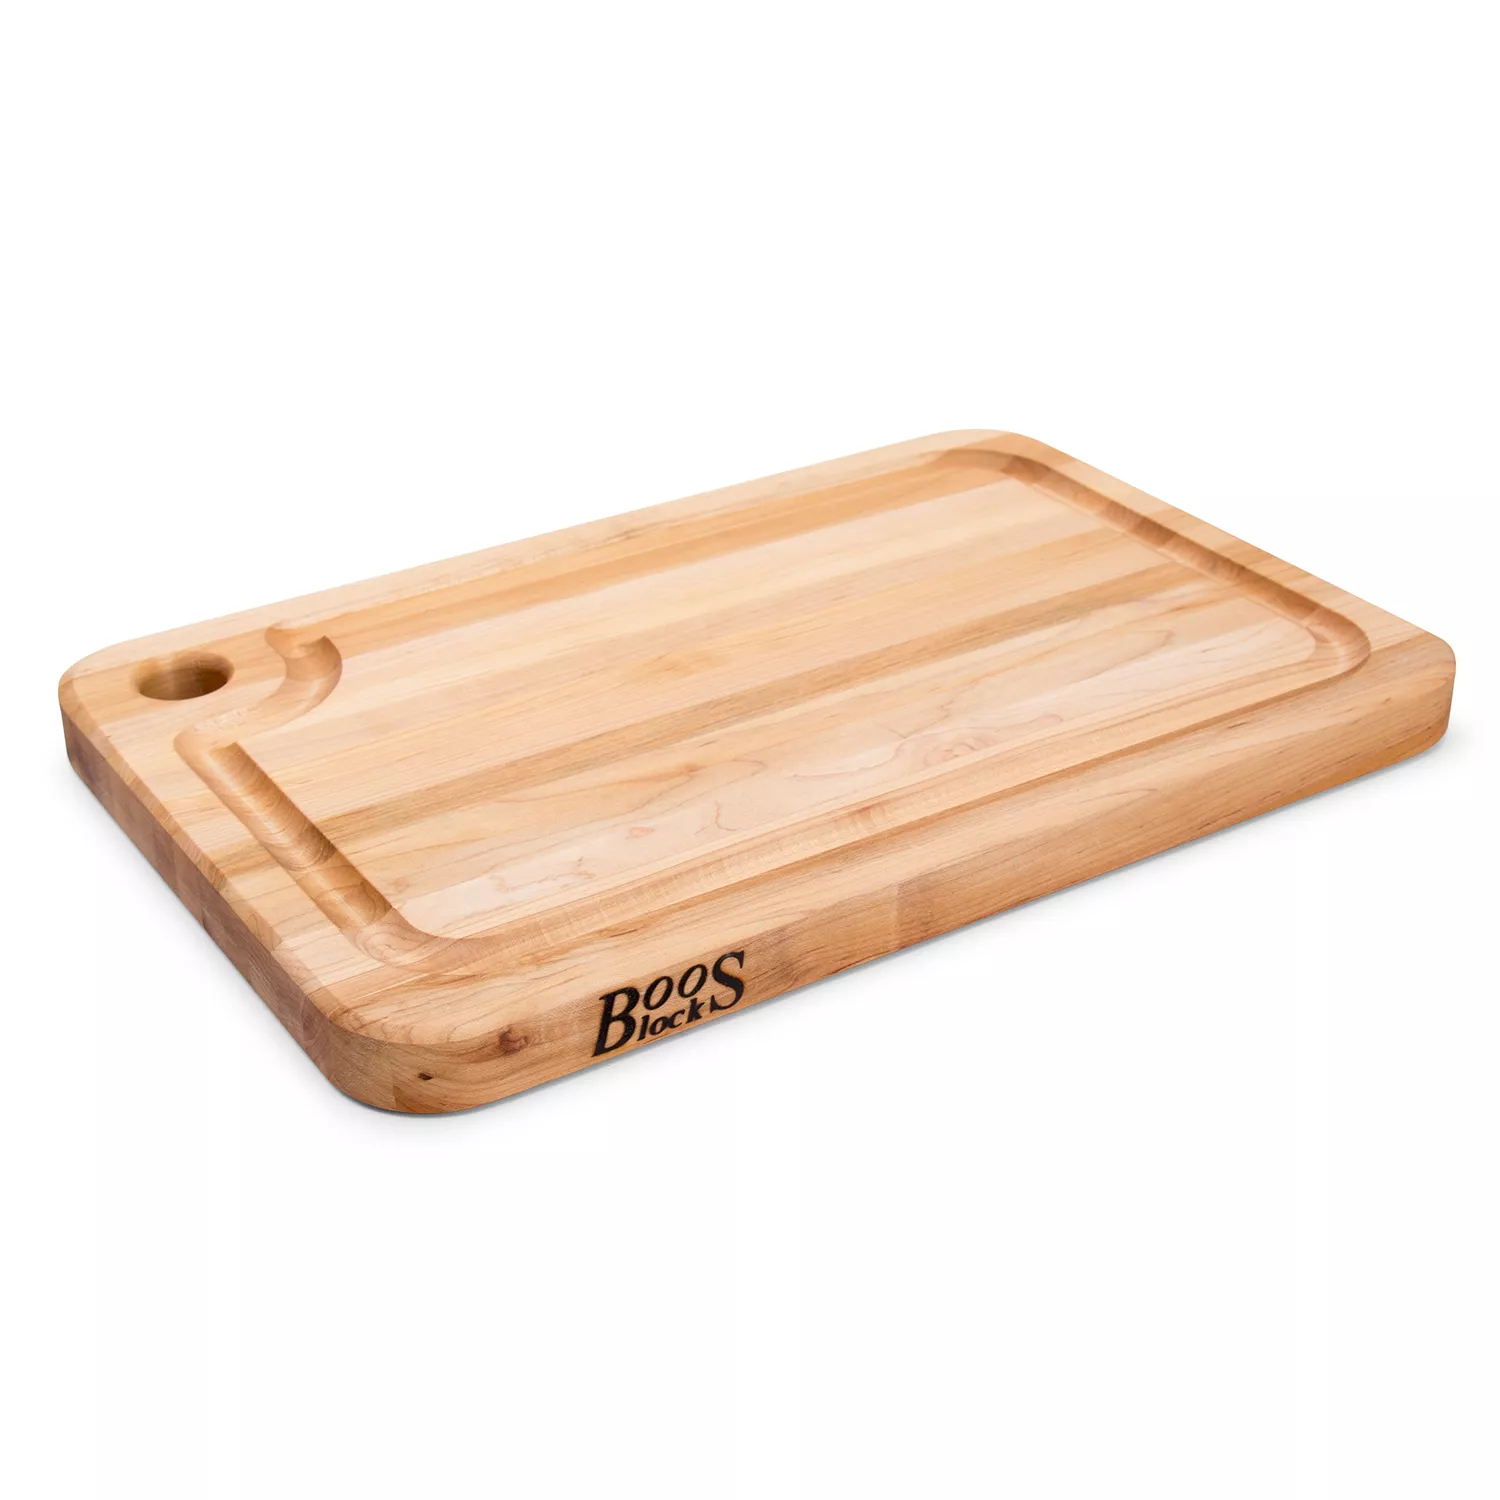 Maple Round Chopping Block with Metal Handles 3 Thick (Handle Boards)